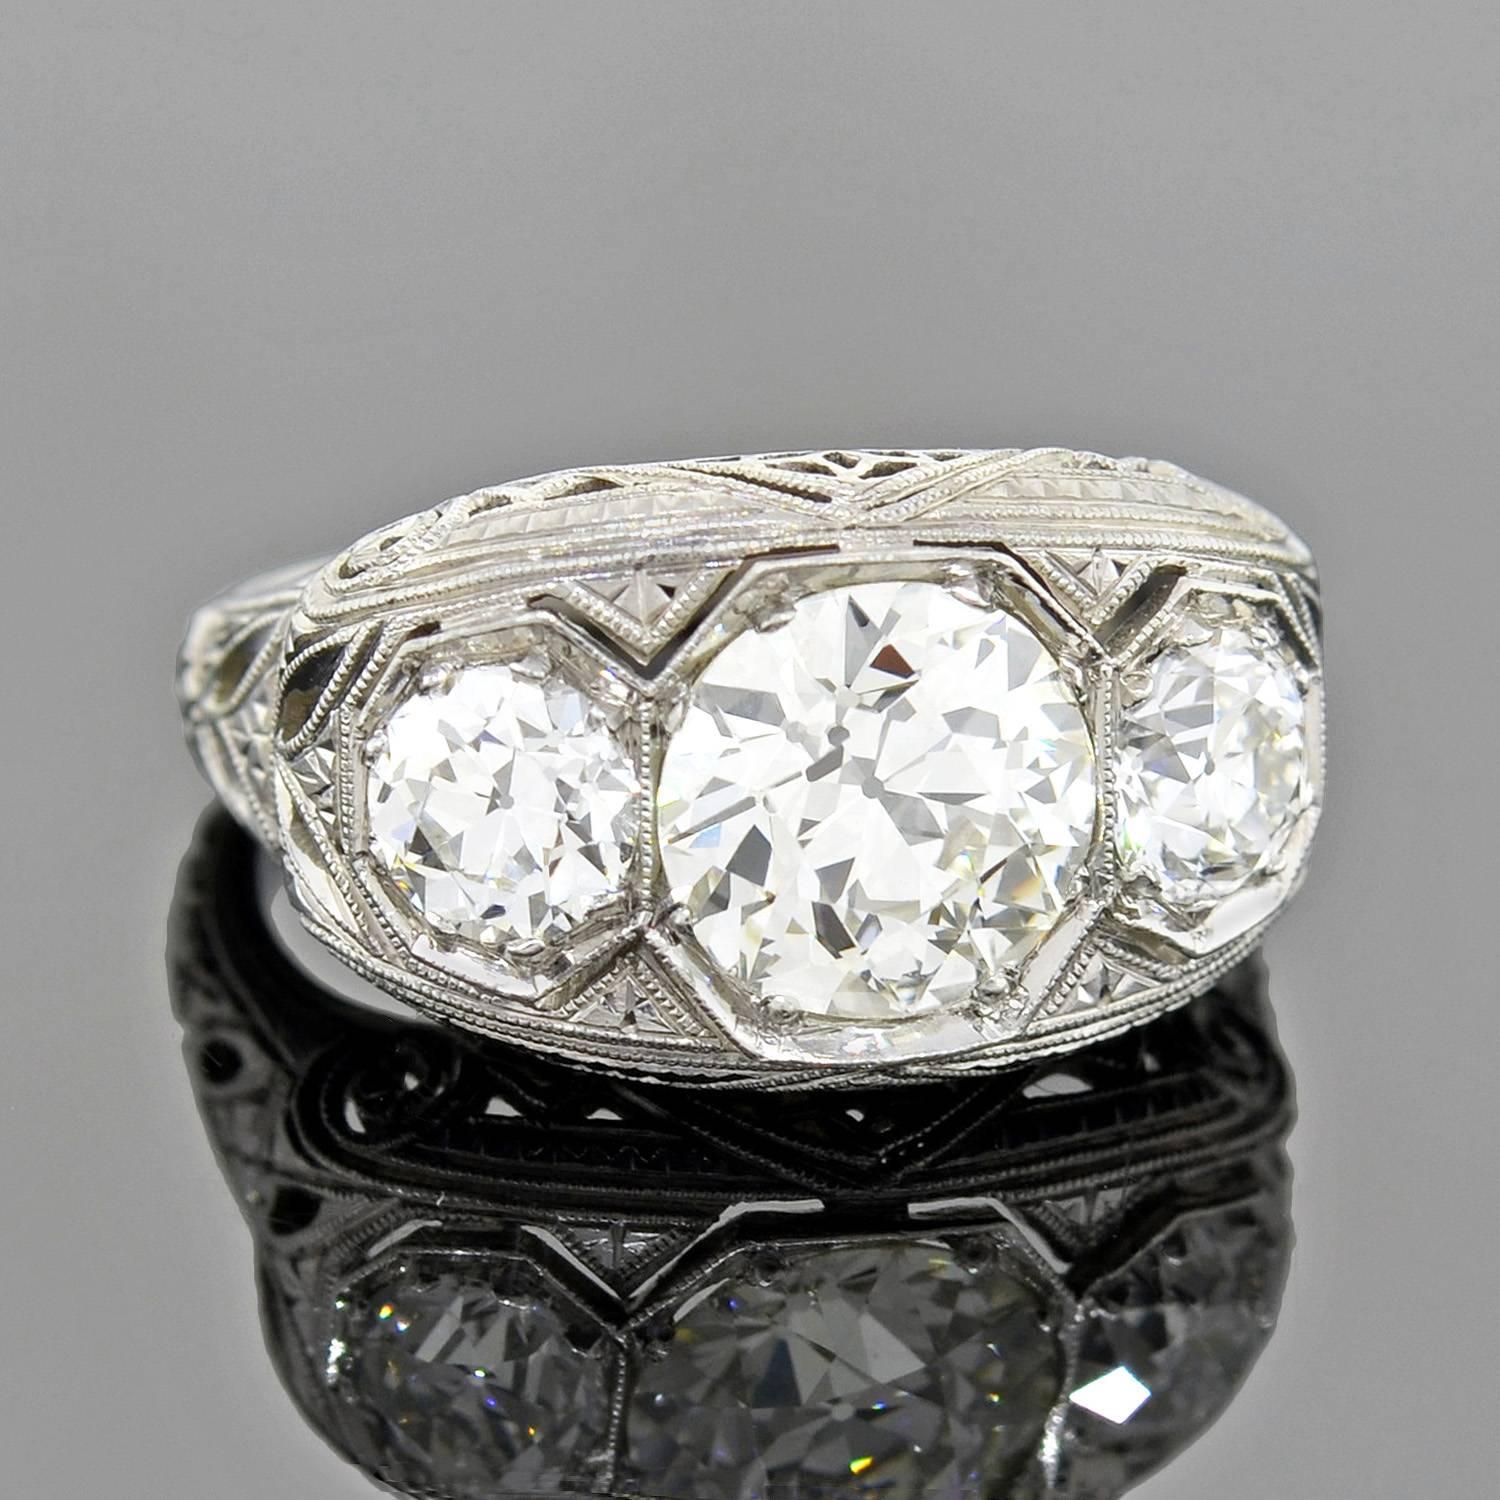 A lovely 3-stone diamond ring from the Art Deco (ca1920) era! This beautiful piece has three diamond stones that rests atop a delicate and ornate filigree mounting. The diamonds, which are old European Cut stones, have an approximate total weight of